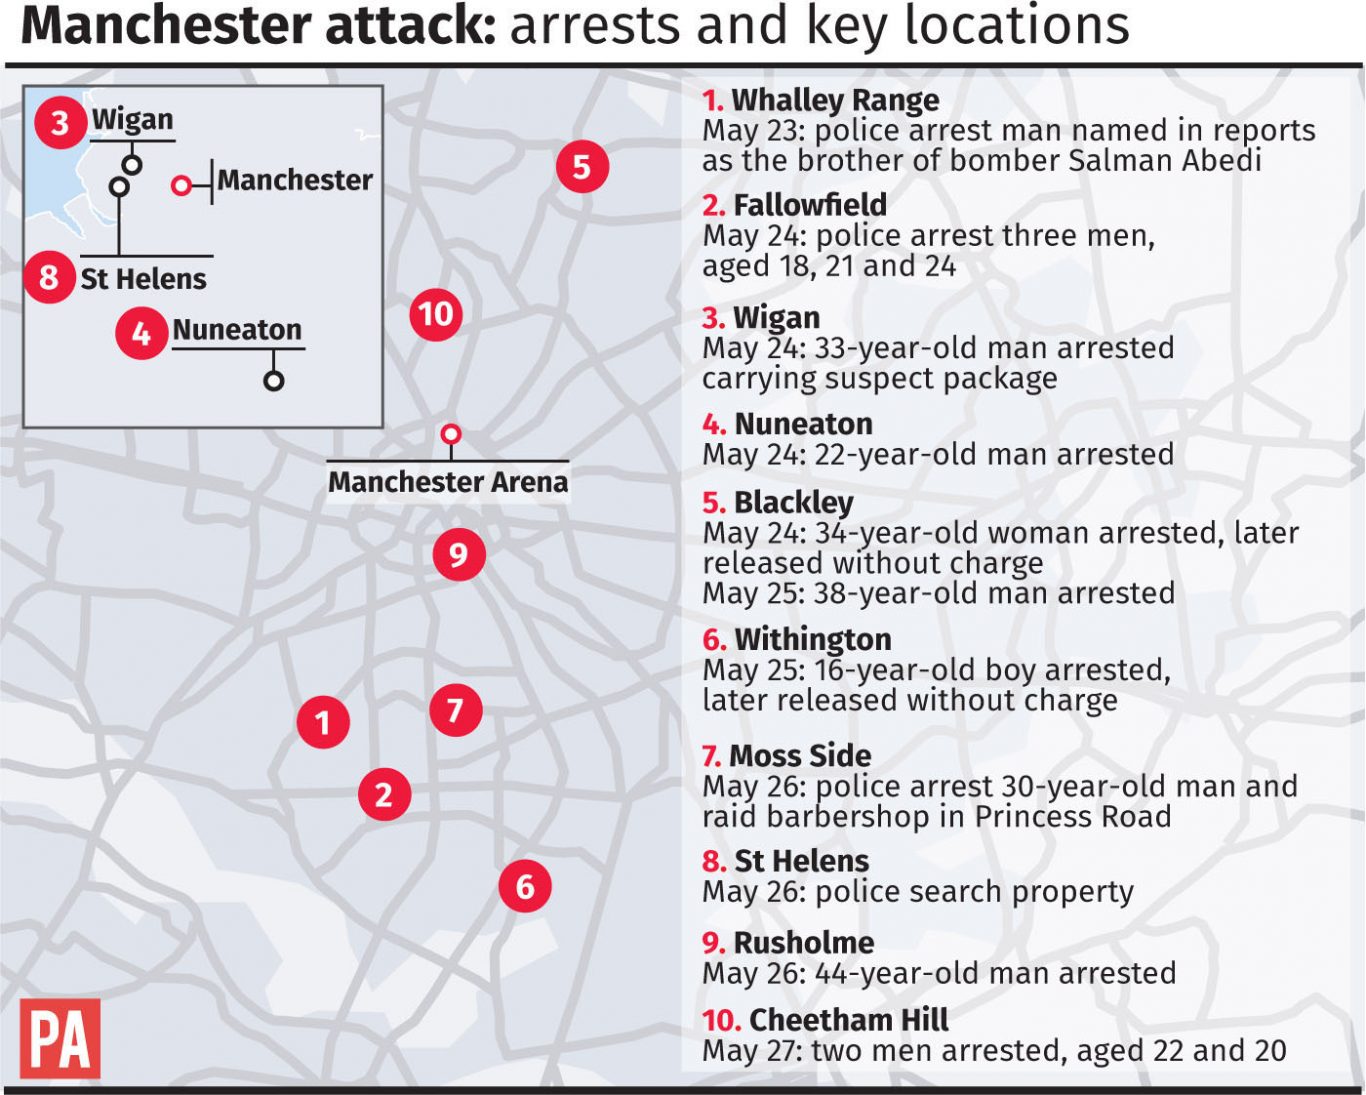 Manchester attack, arrests and key locations graphic